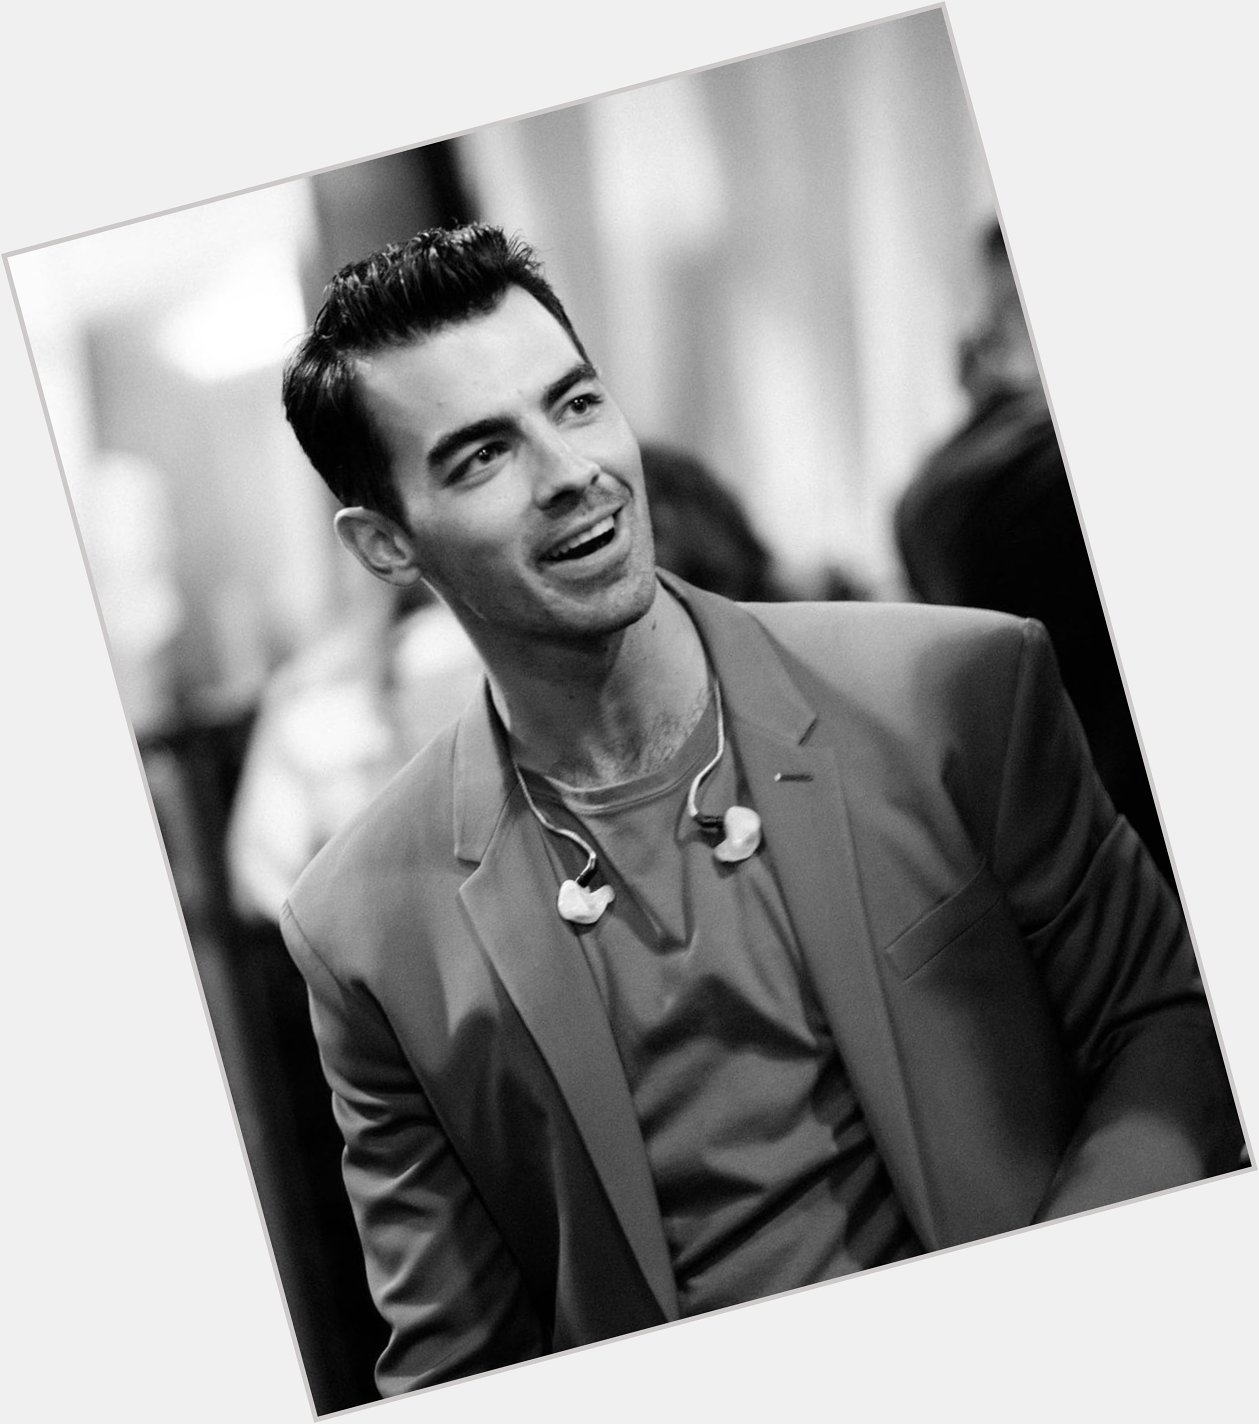 There s only one thing worth celebrating today

happy birthday to the king himself, mr Joe Jonas 